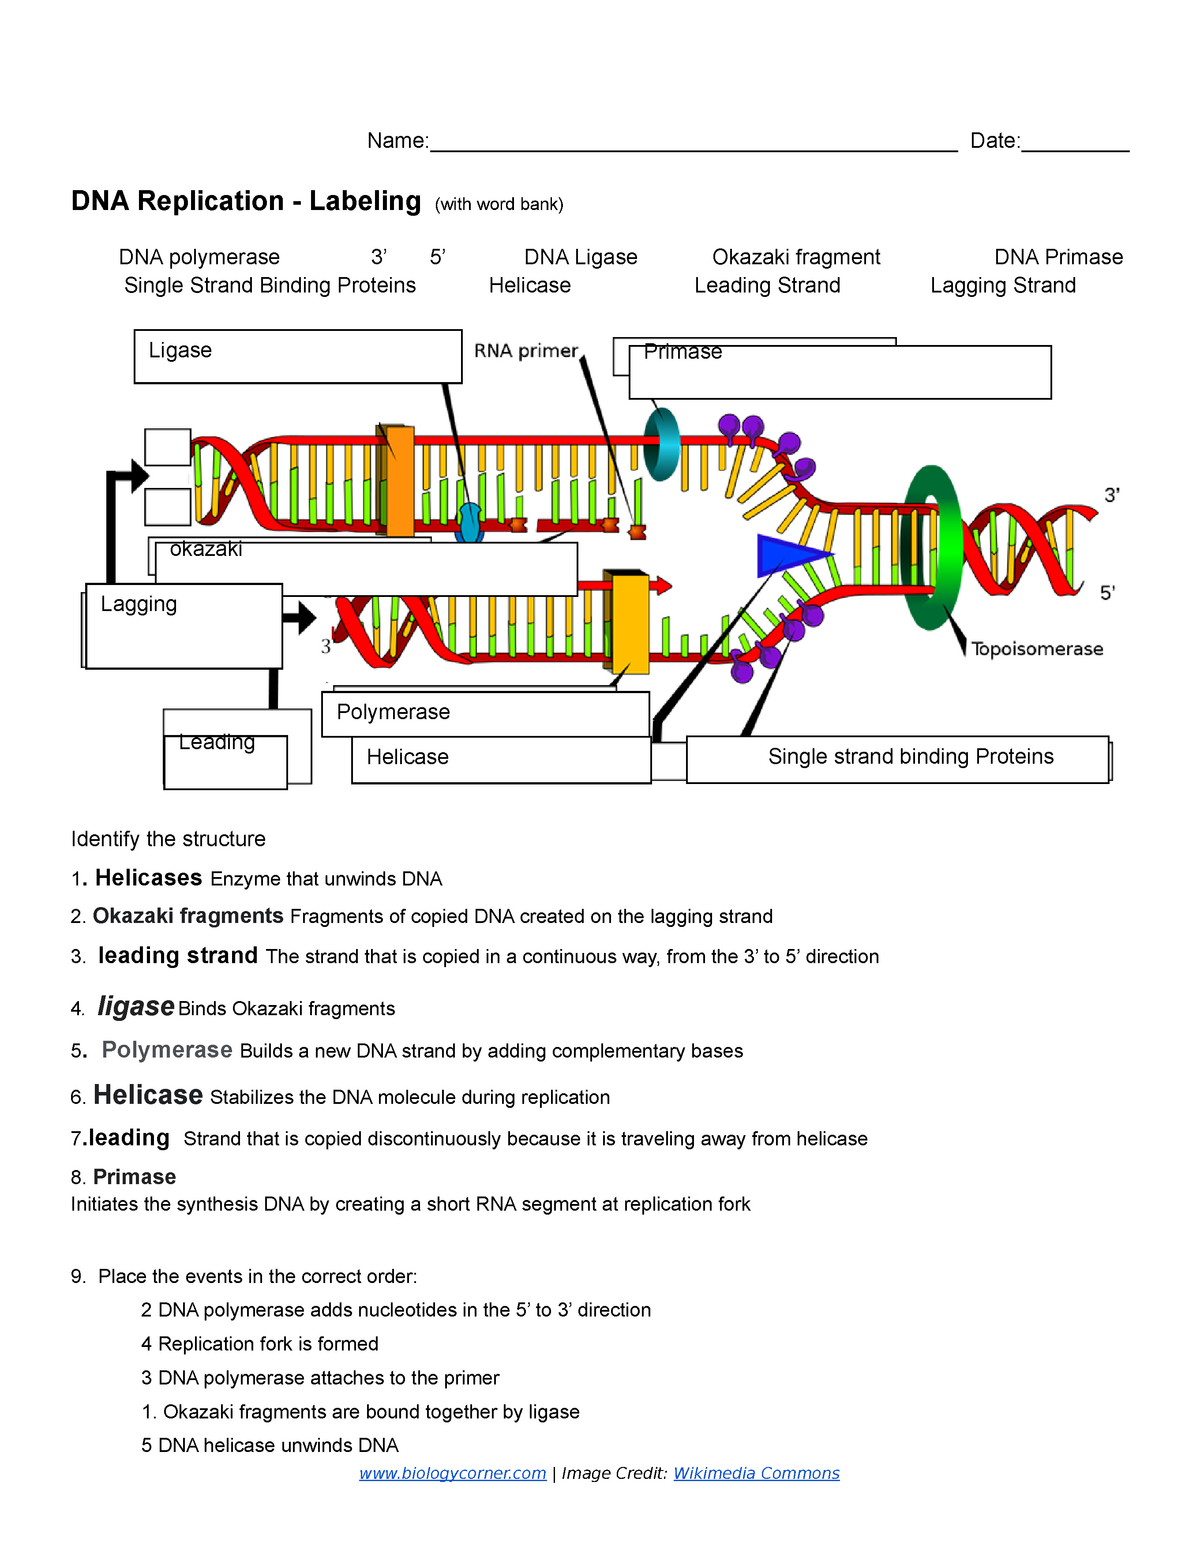 Copy of DNA Replication - Labeling 11 - Name: - StuDocu Throughout Dna And Replication Worksheet